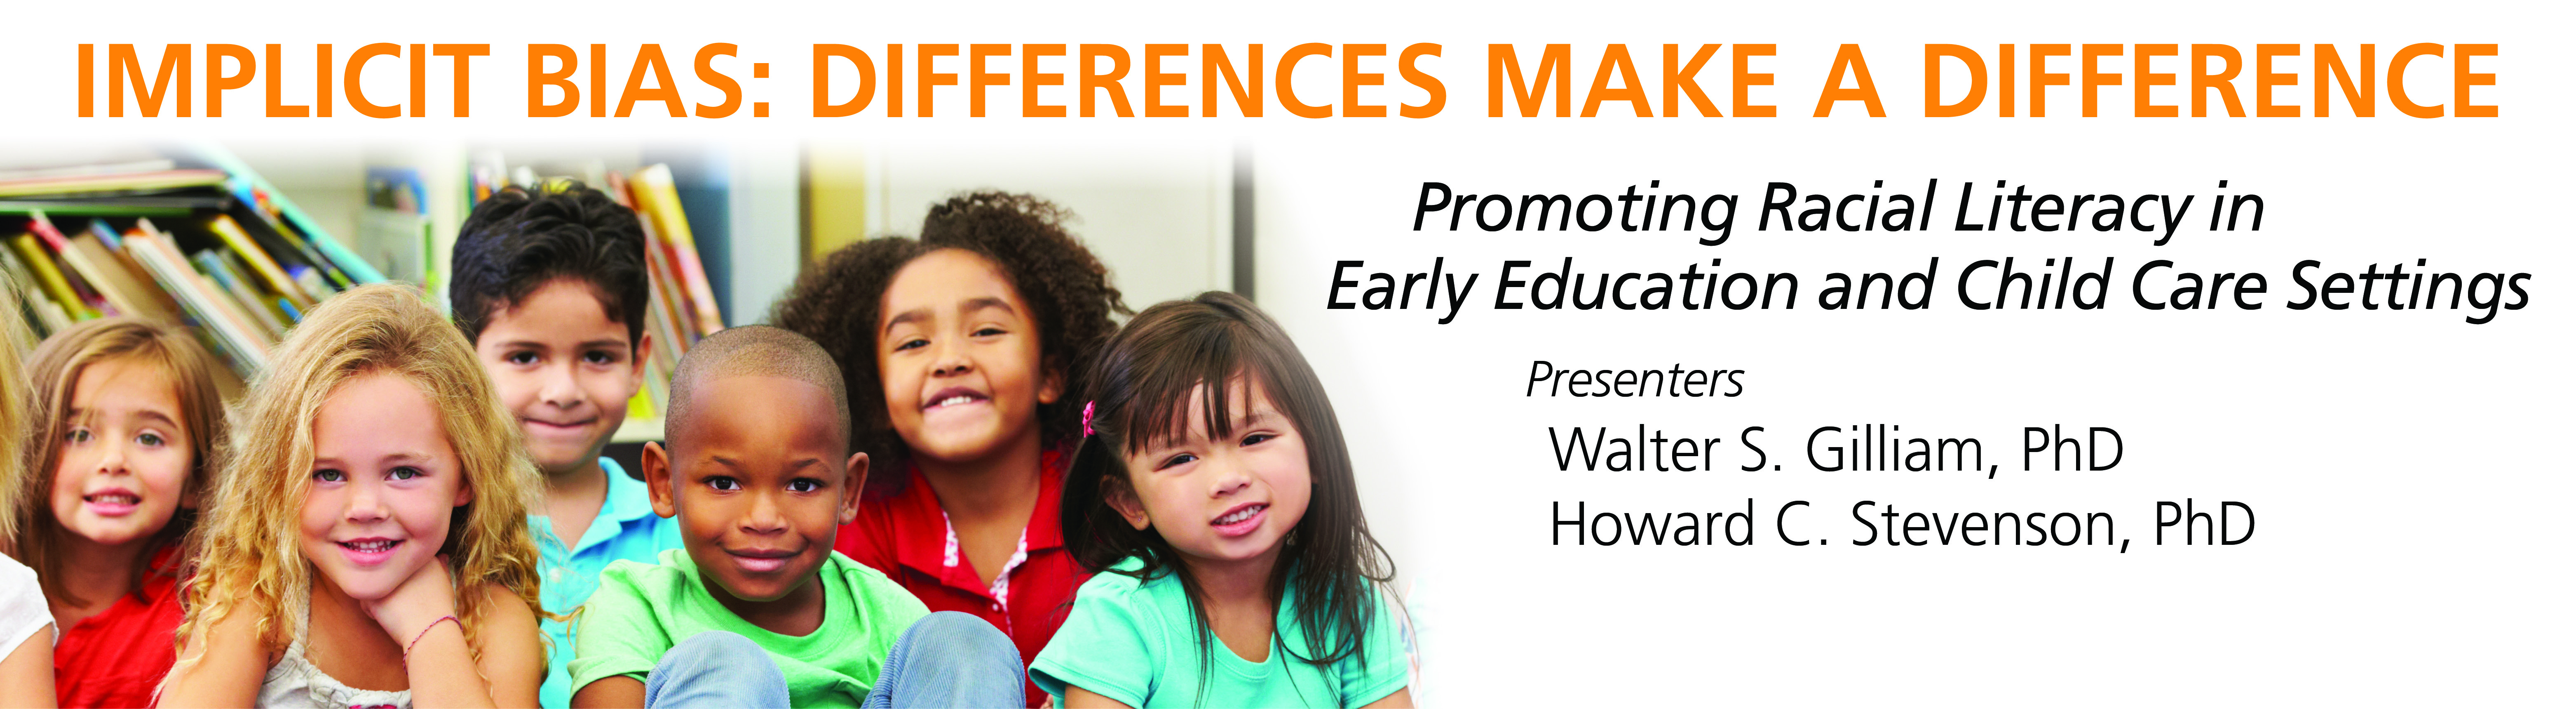 Child Care Conference 2017 — IMPLICIT BIAS: DIFFERENCES MAKE A DIFFERENCE